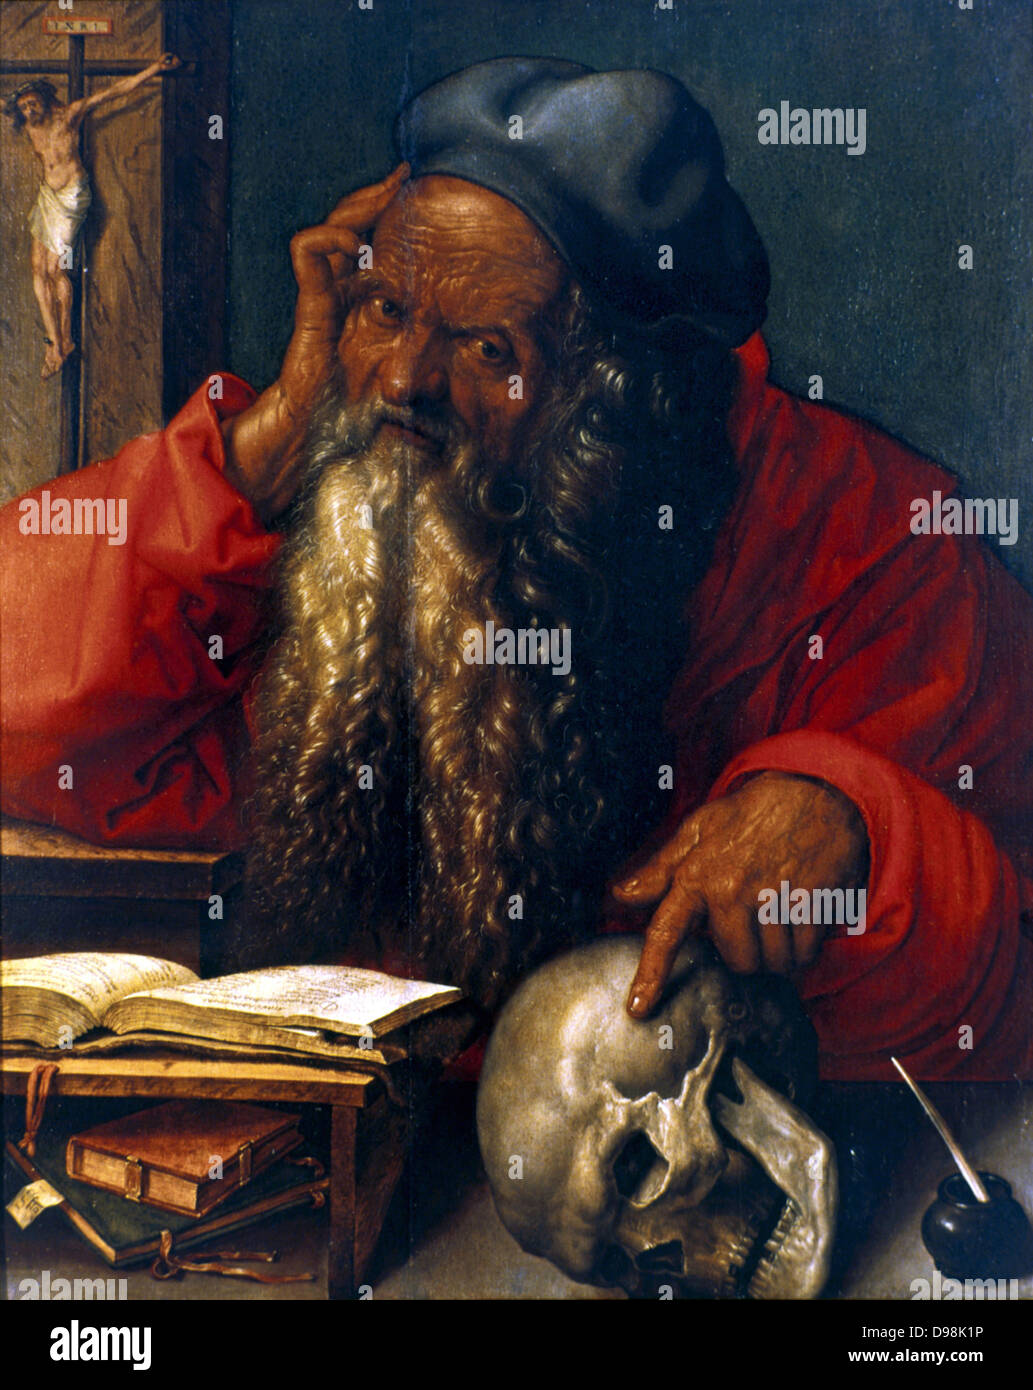 St Jerome', 1521, oil on panel , Albrecht Durer (1471-1528) German painter and printmaker. St Jerome (c340-420) a father of Western Christian Church and compiler of the Vulgate. Human skull, a memento mori, forked beard, ink well, quill pen. Stock Photo